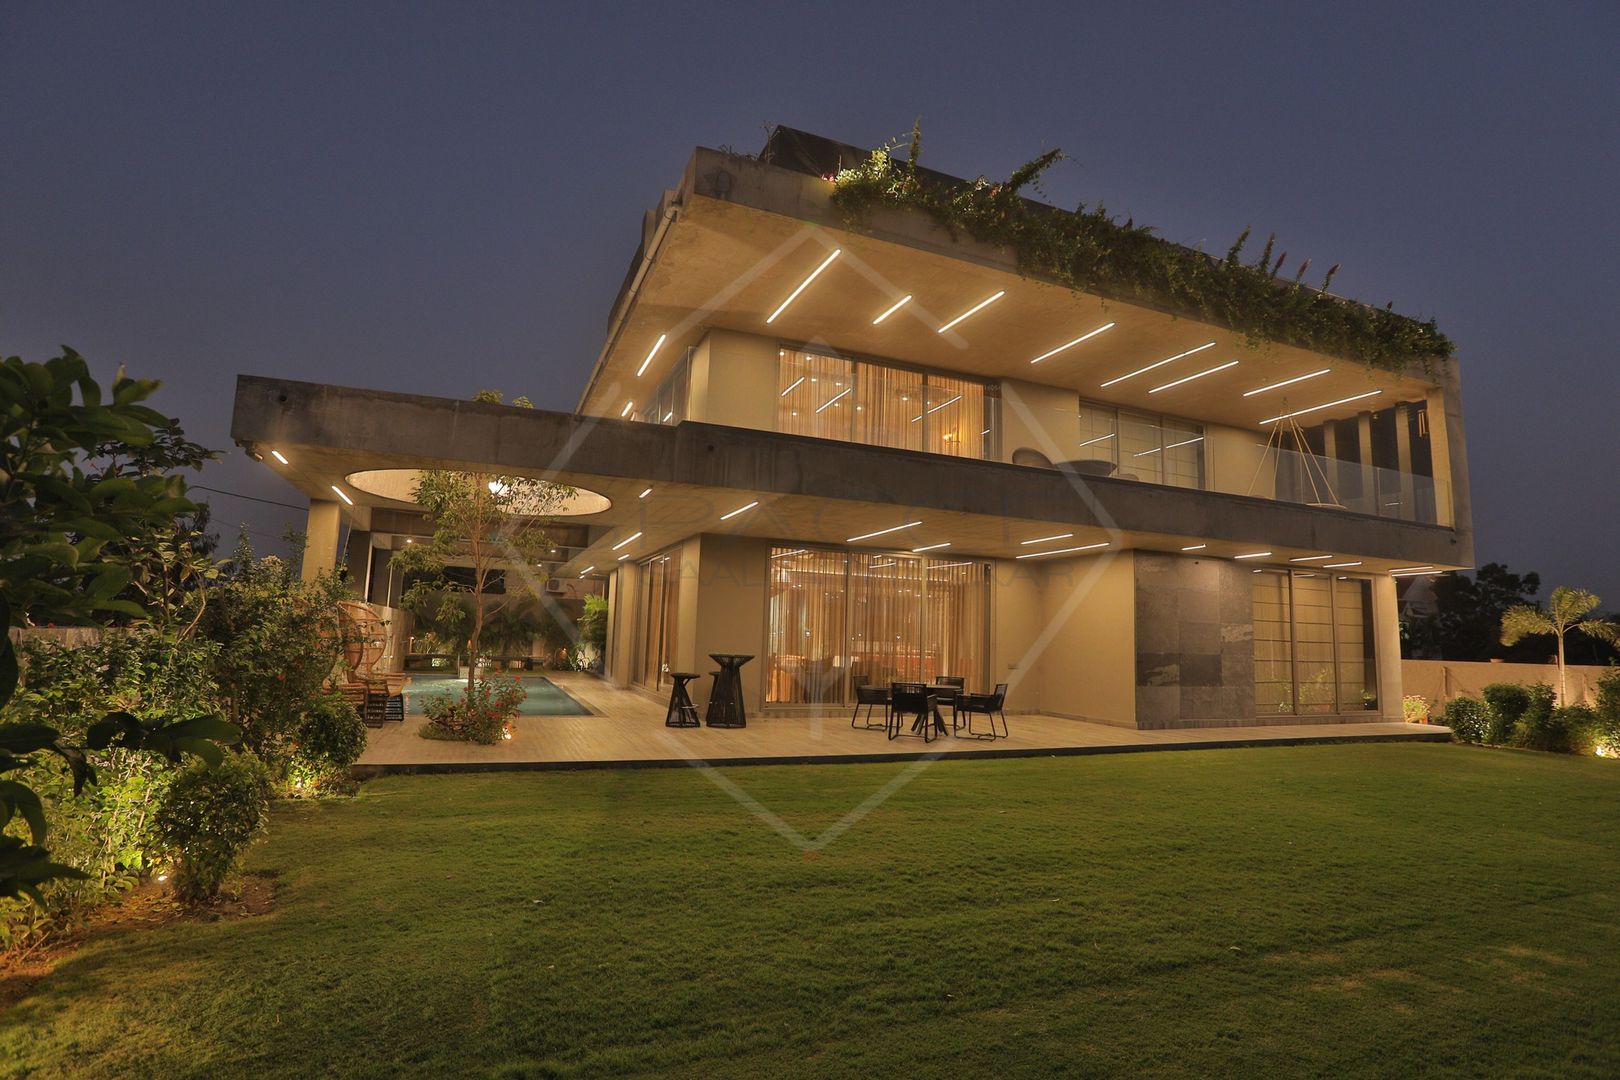 "WRAPED" ARCHITECTURE -, SPACCE INTERIORS SPACCE INTERIORS Bungalows